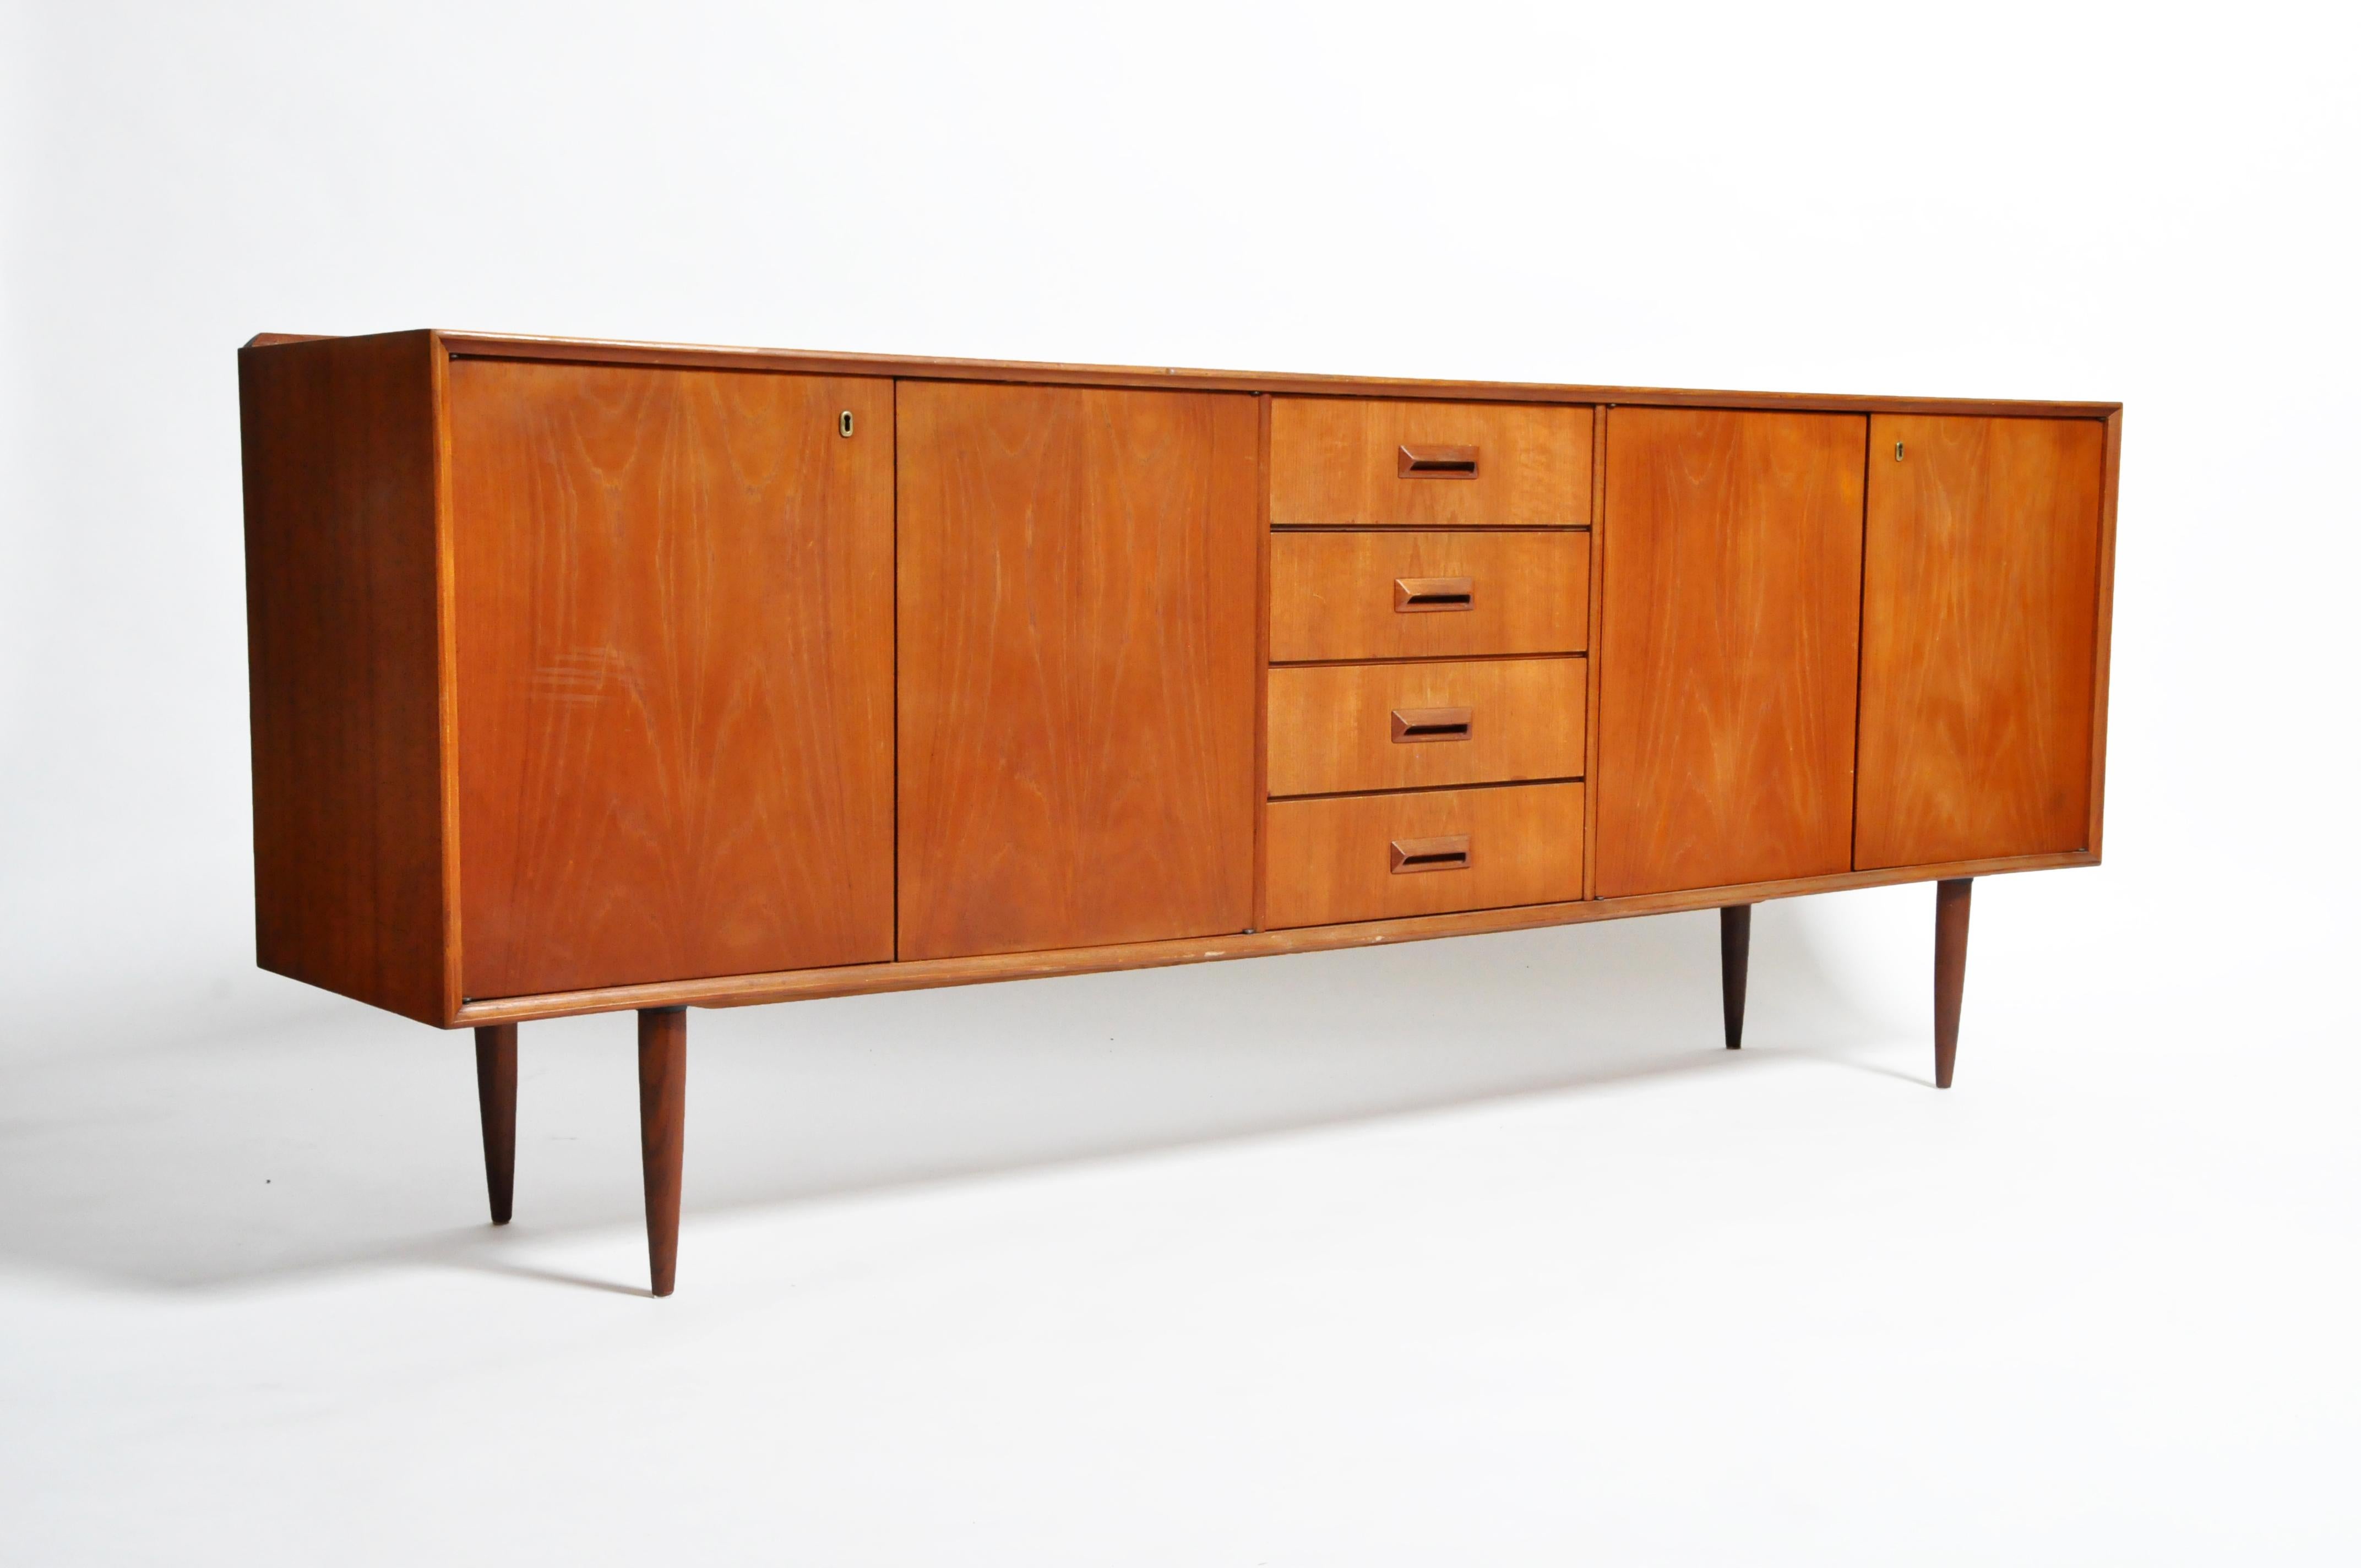 This handsome Mid-Century Modern sideboard is from Denmark and was made from teak wood veneer, circa 1960. This piece features four drawers and four doors that open up to shelves for storage.